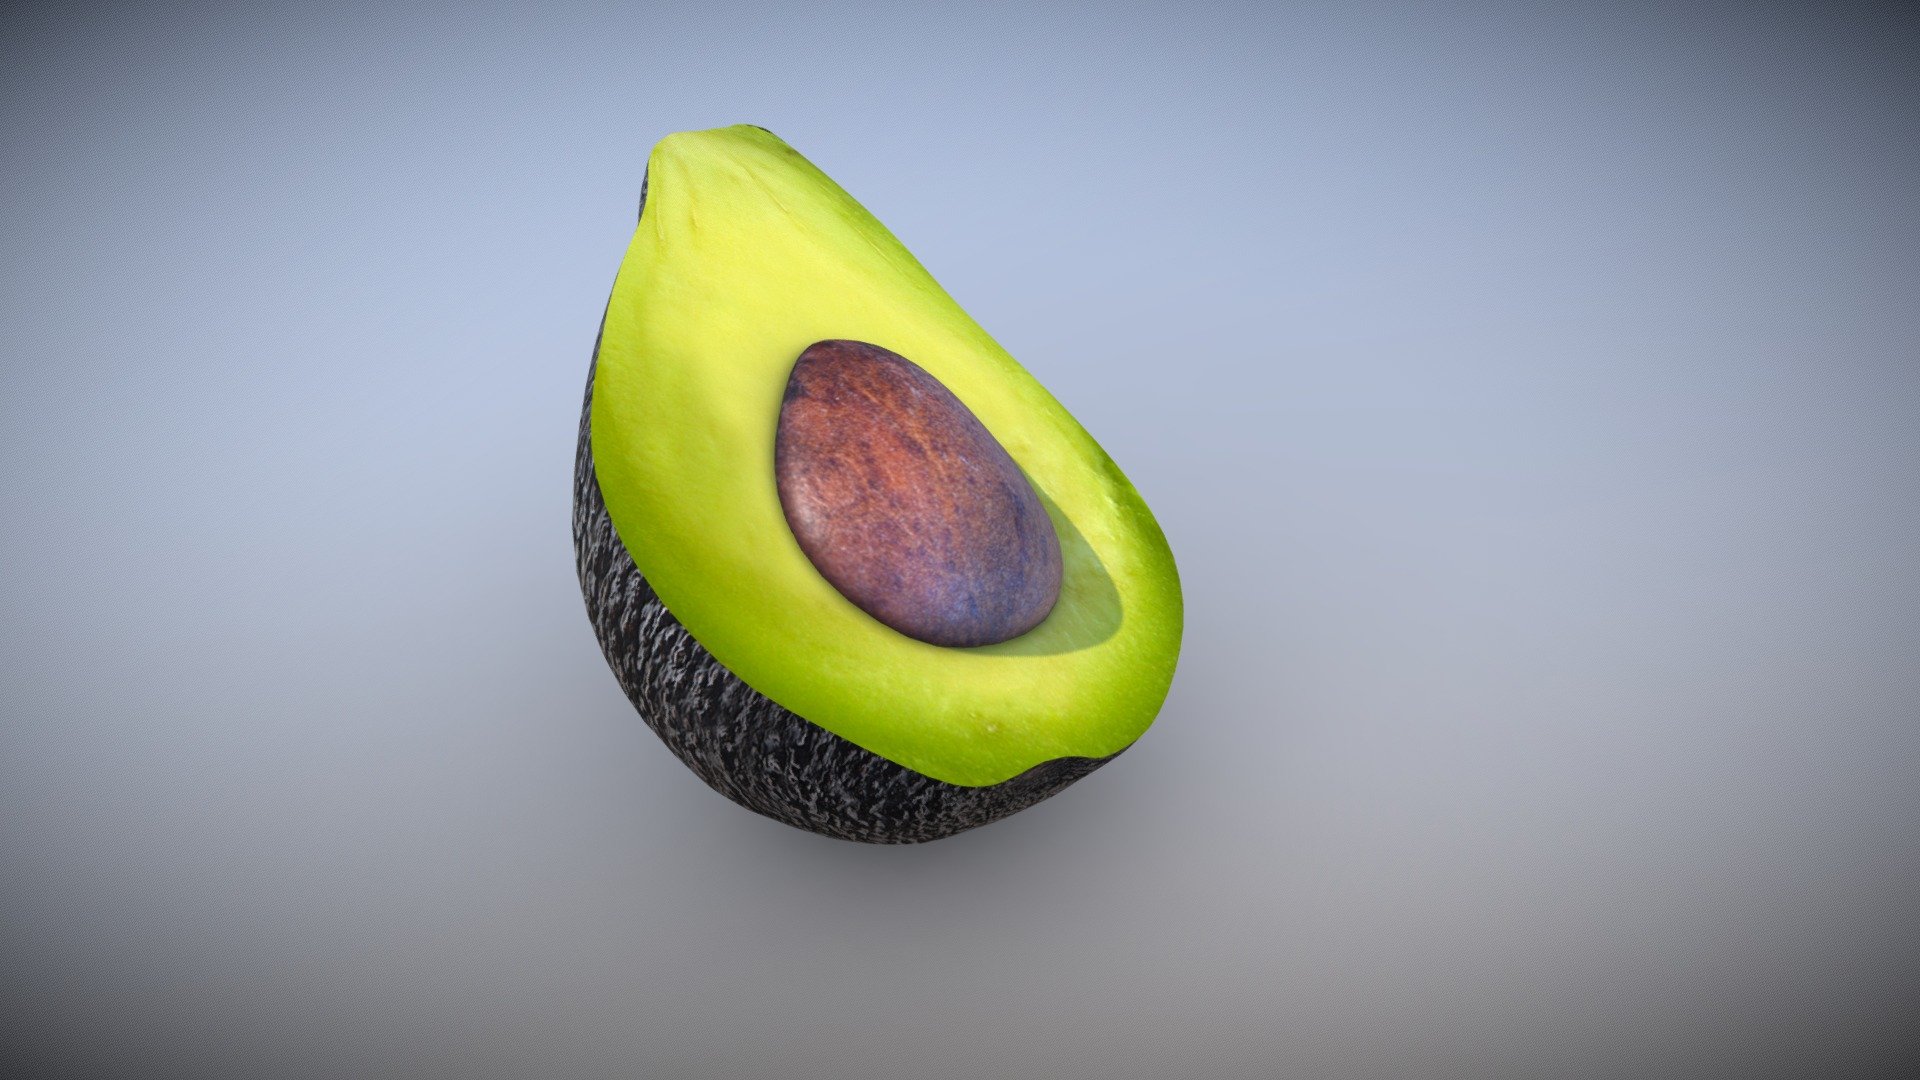 3D Avocado fruit
Downlod Low Mesh for Fast Redndering 
Quality Output Render in Less time - 3D Avocado fruit - 3D model by Kailash H Kanojia (@KailashHKanojia) 3d model